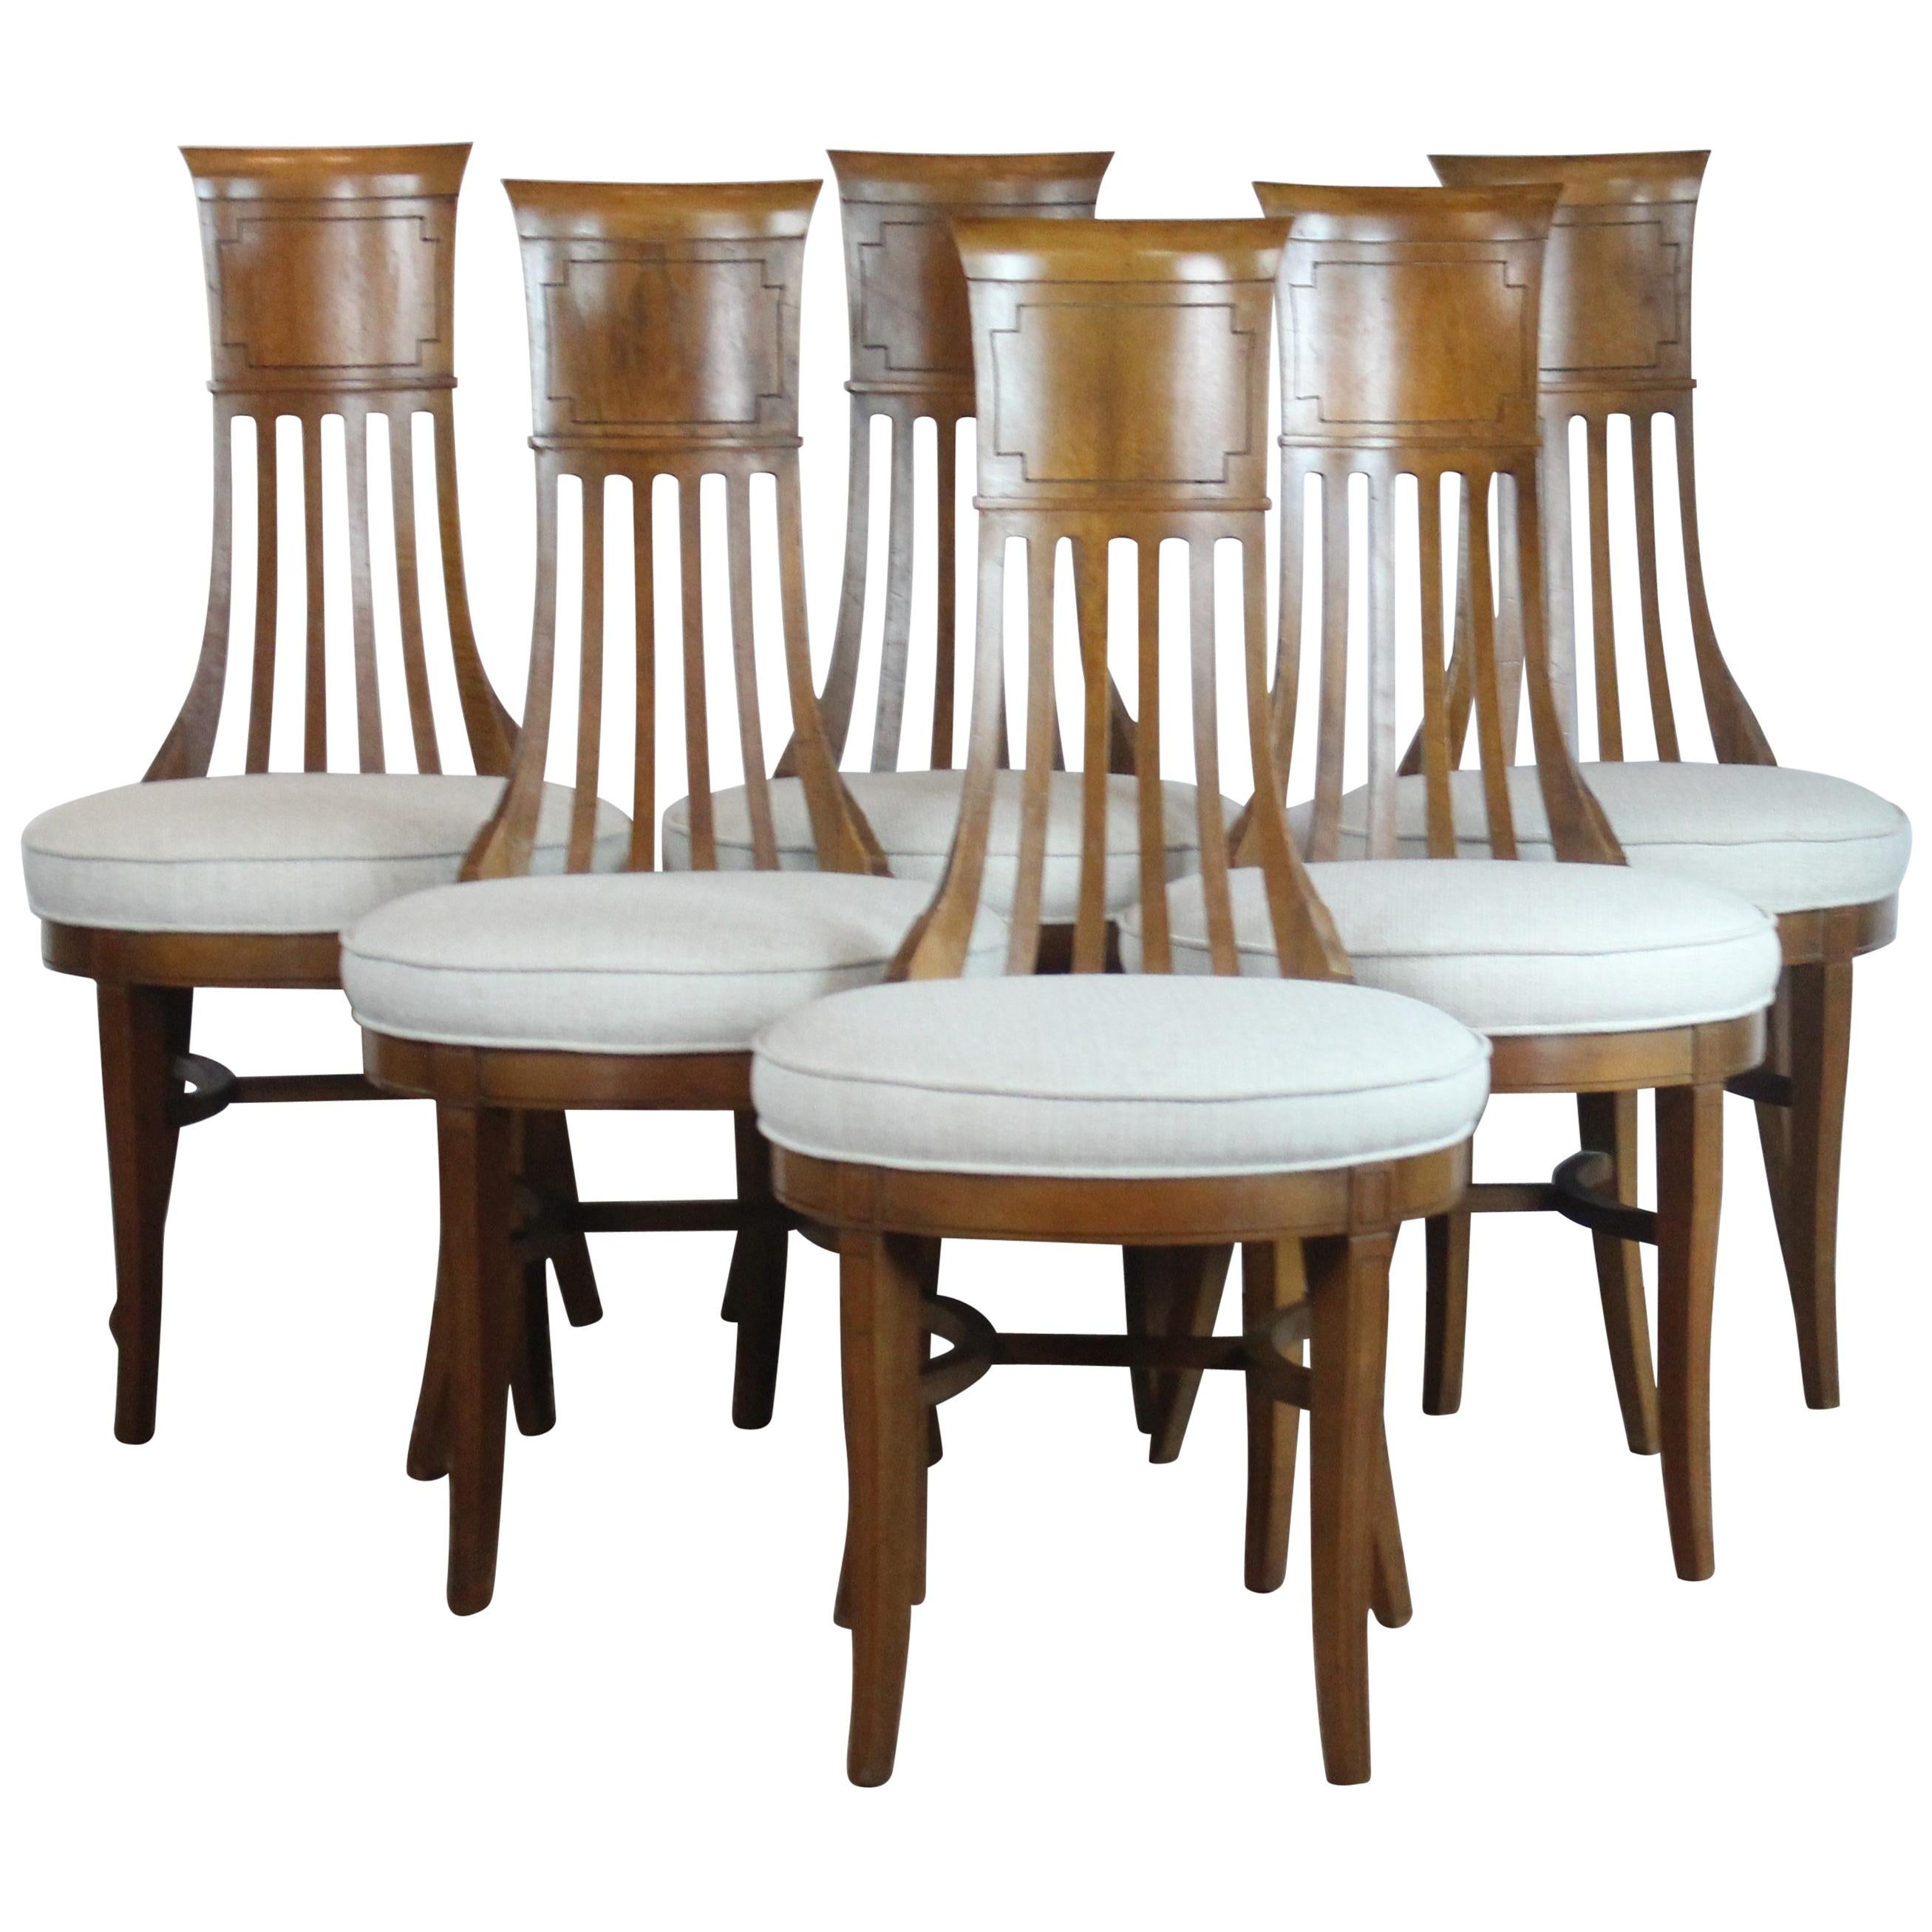 Biedermier Style Dining Chair Set of 6